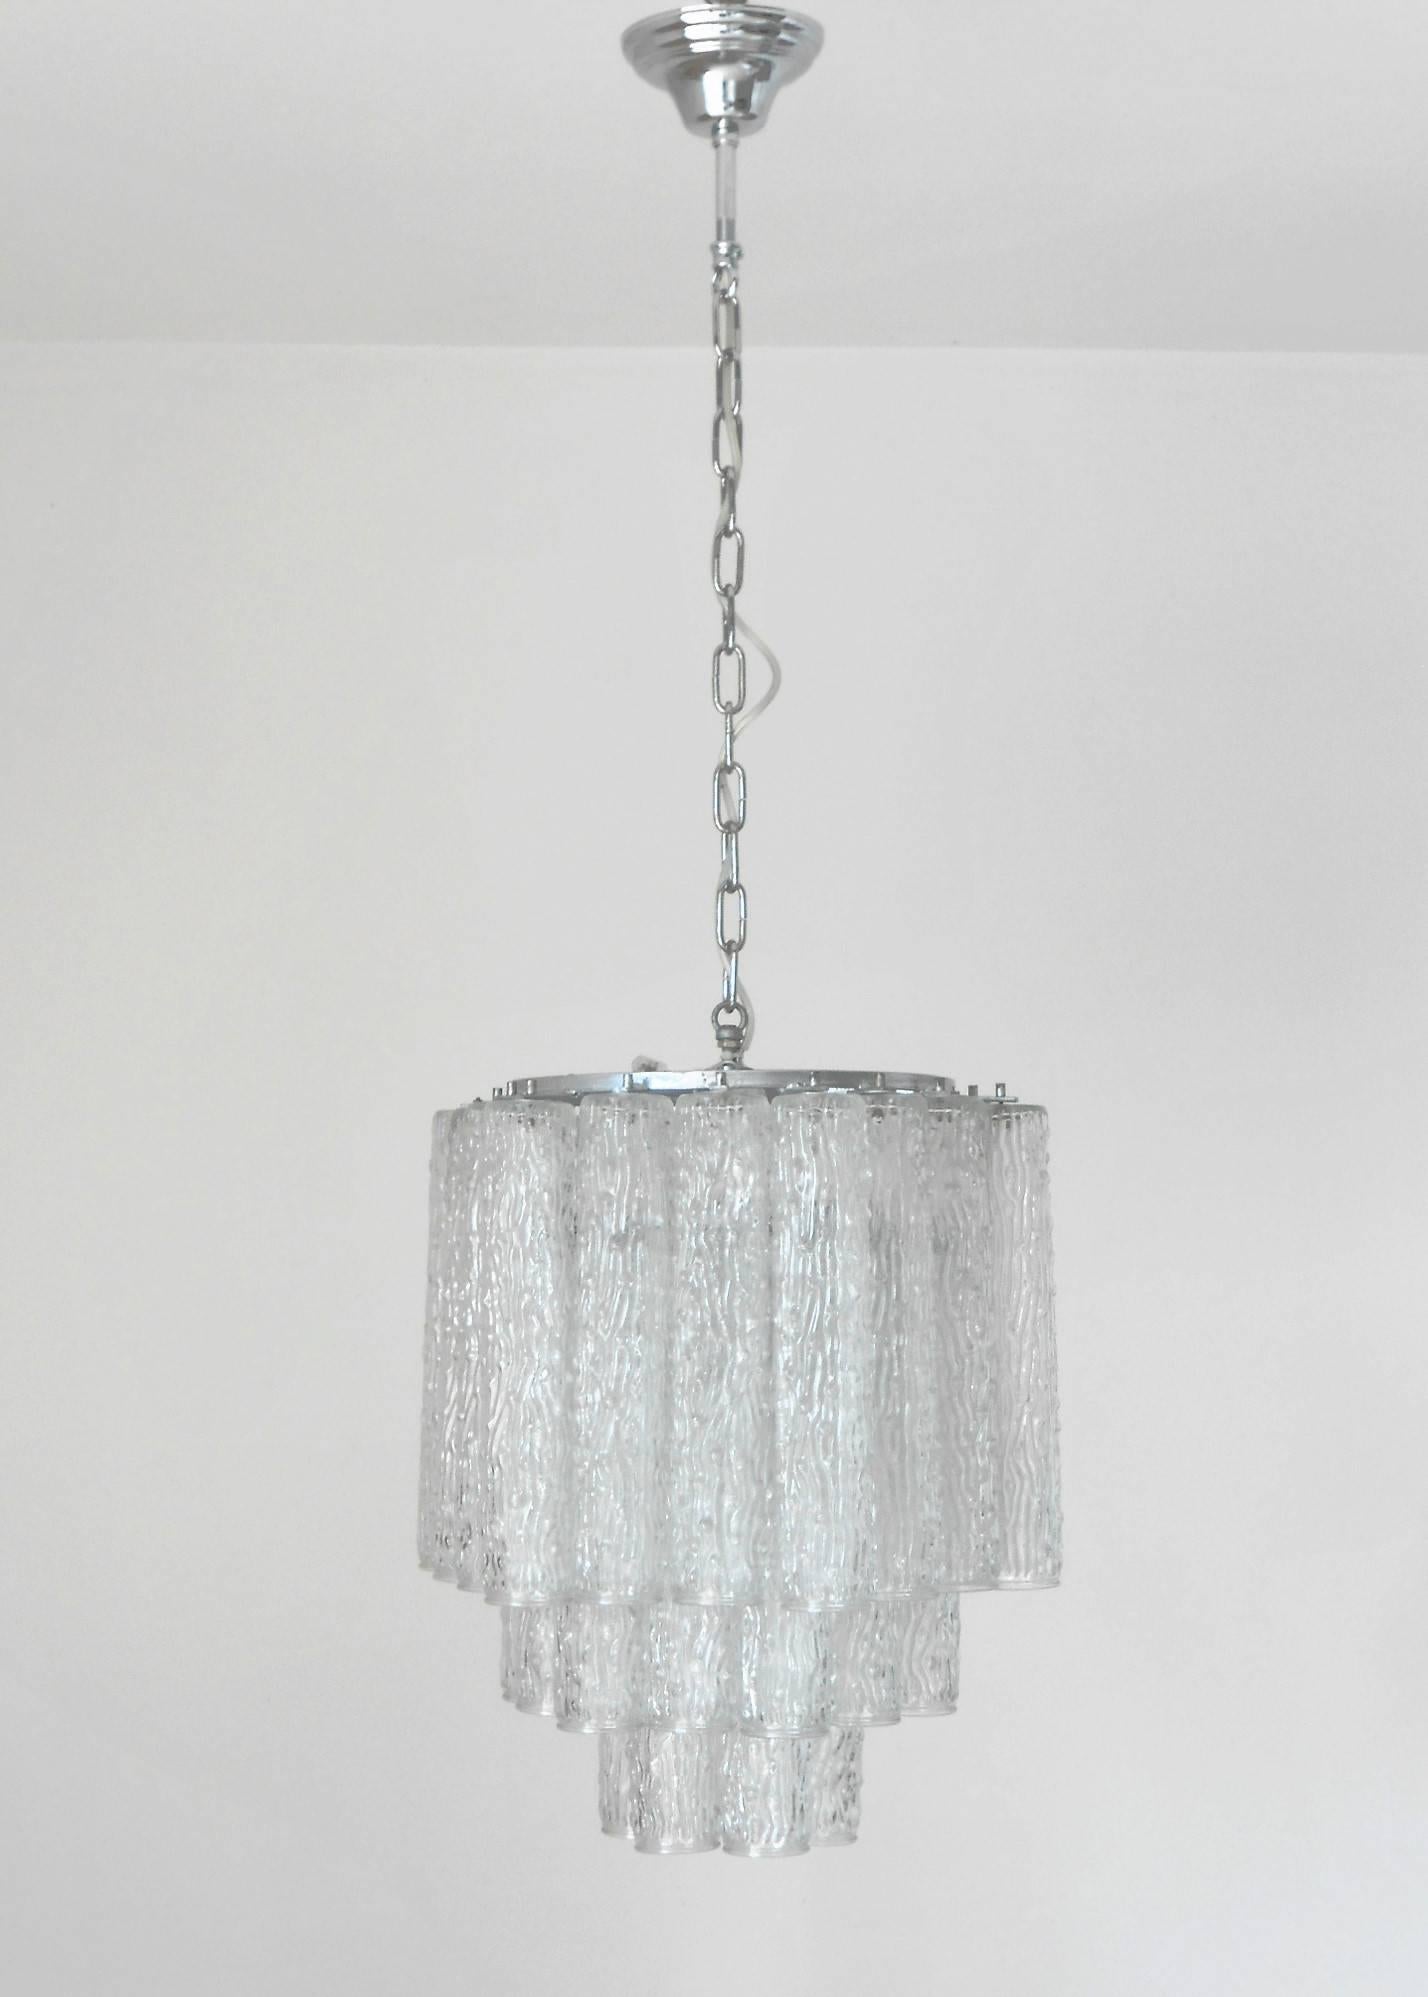 Vintage Italian chandelier with clear Murano glass tubes hand blown using Corteccia technique to provide a bark-like textured effect, mounted on chrome frame / Designed by Venini circa 1960’s / Made in Italy 
6 lights / E12 or E14 type / max 40W